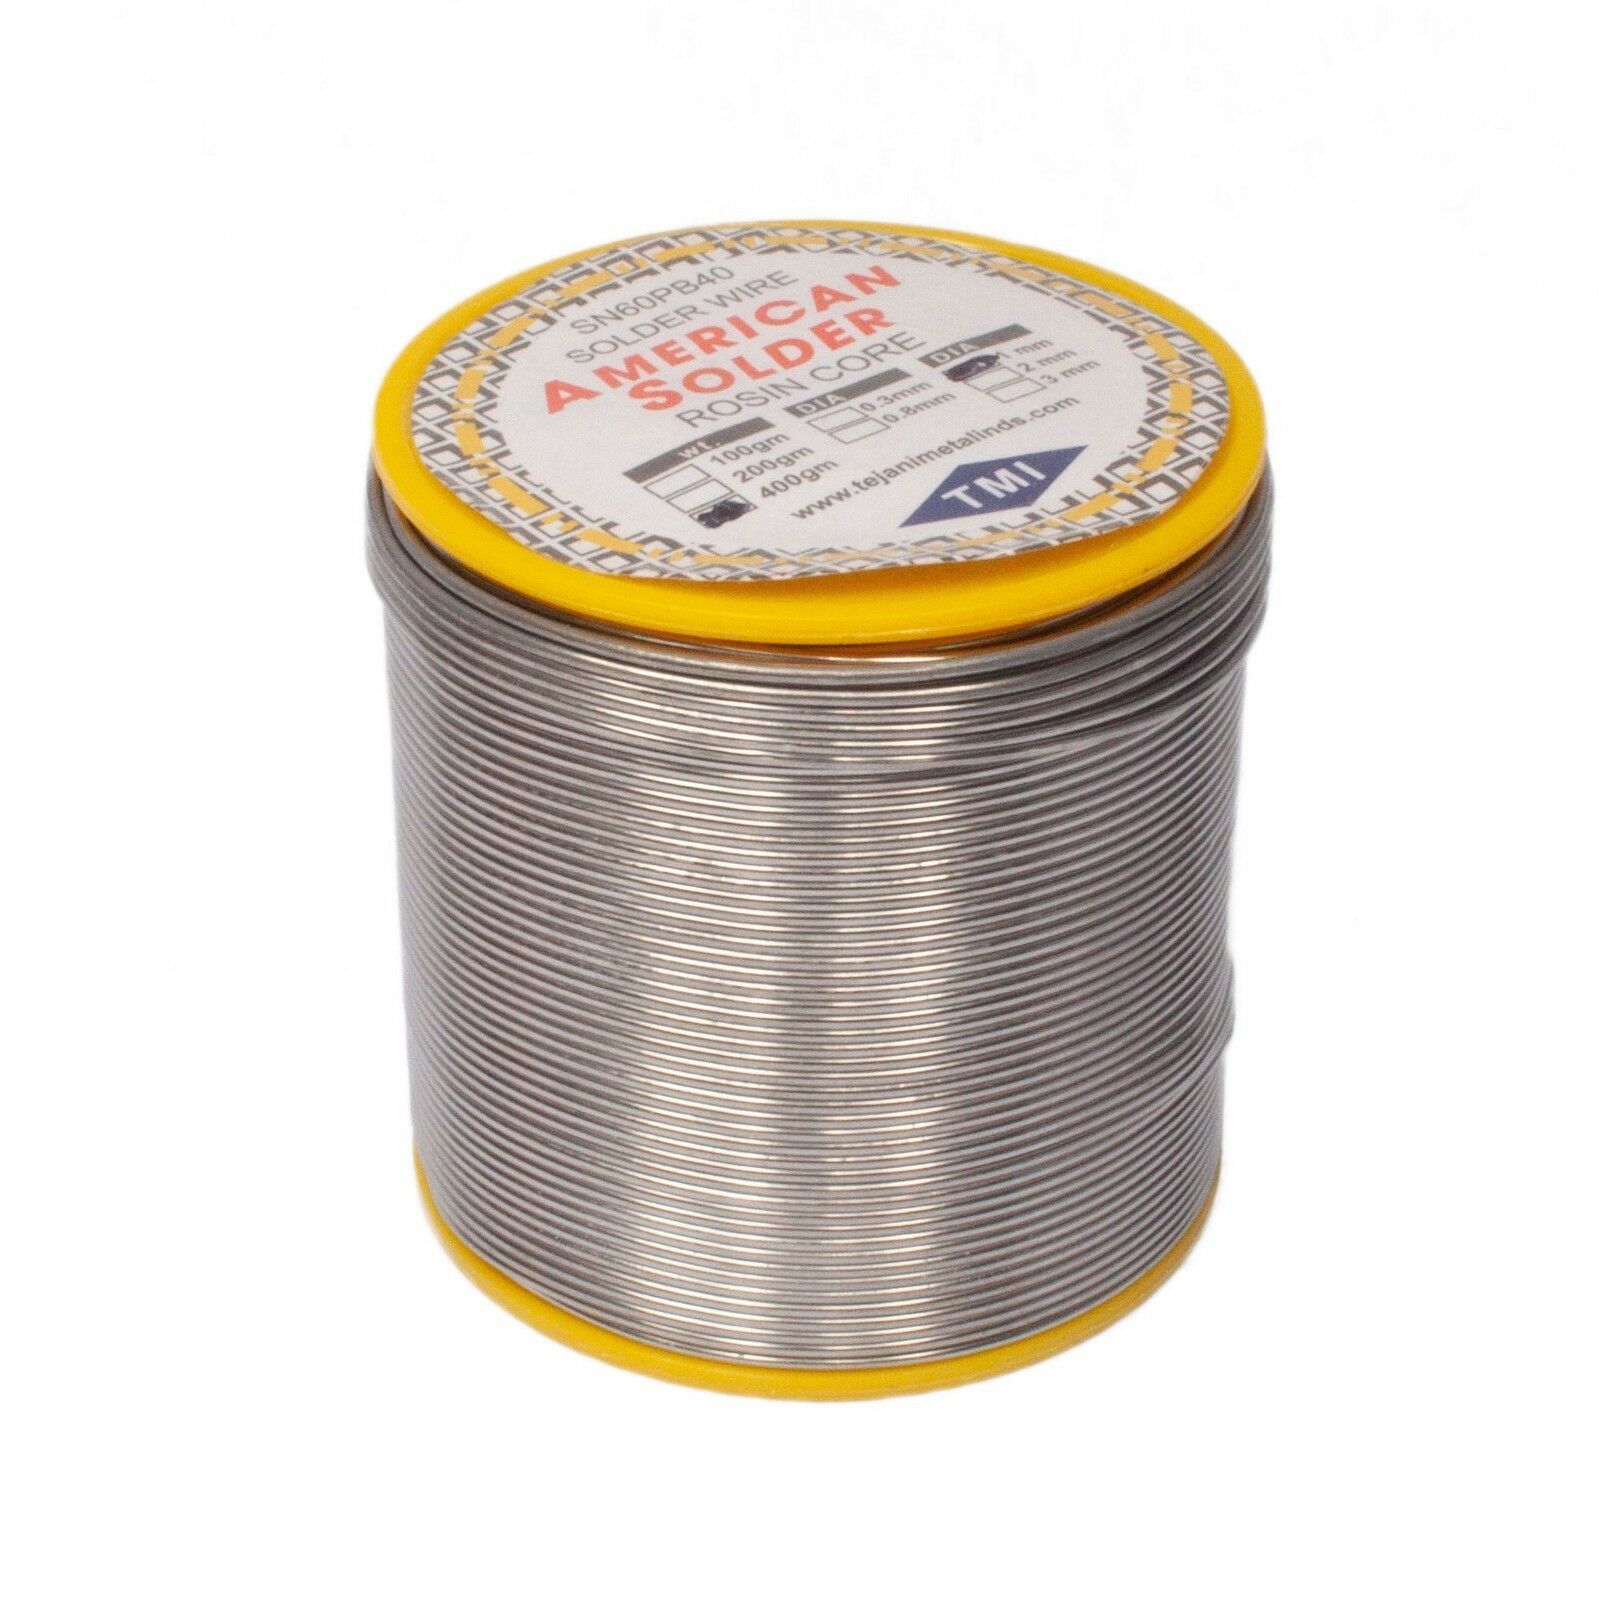 New 400g 1mm 60/40 Tin Lead Solder Rosin Flux Wire Roll Soldering New